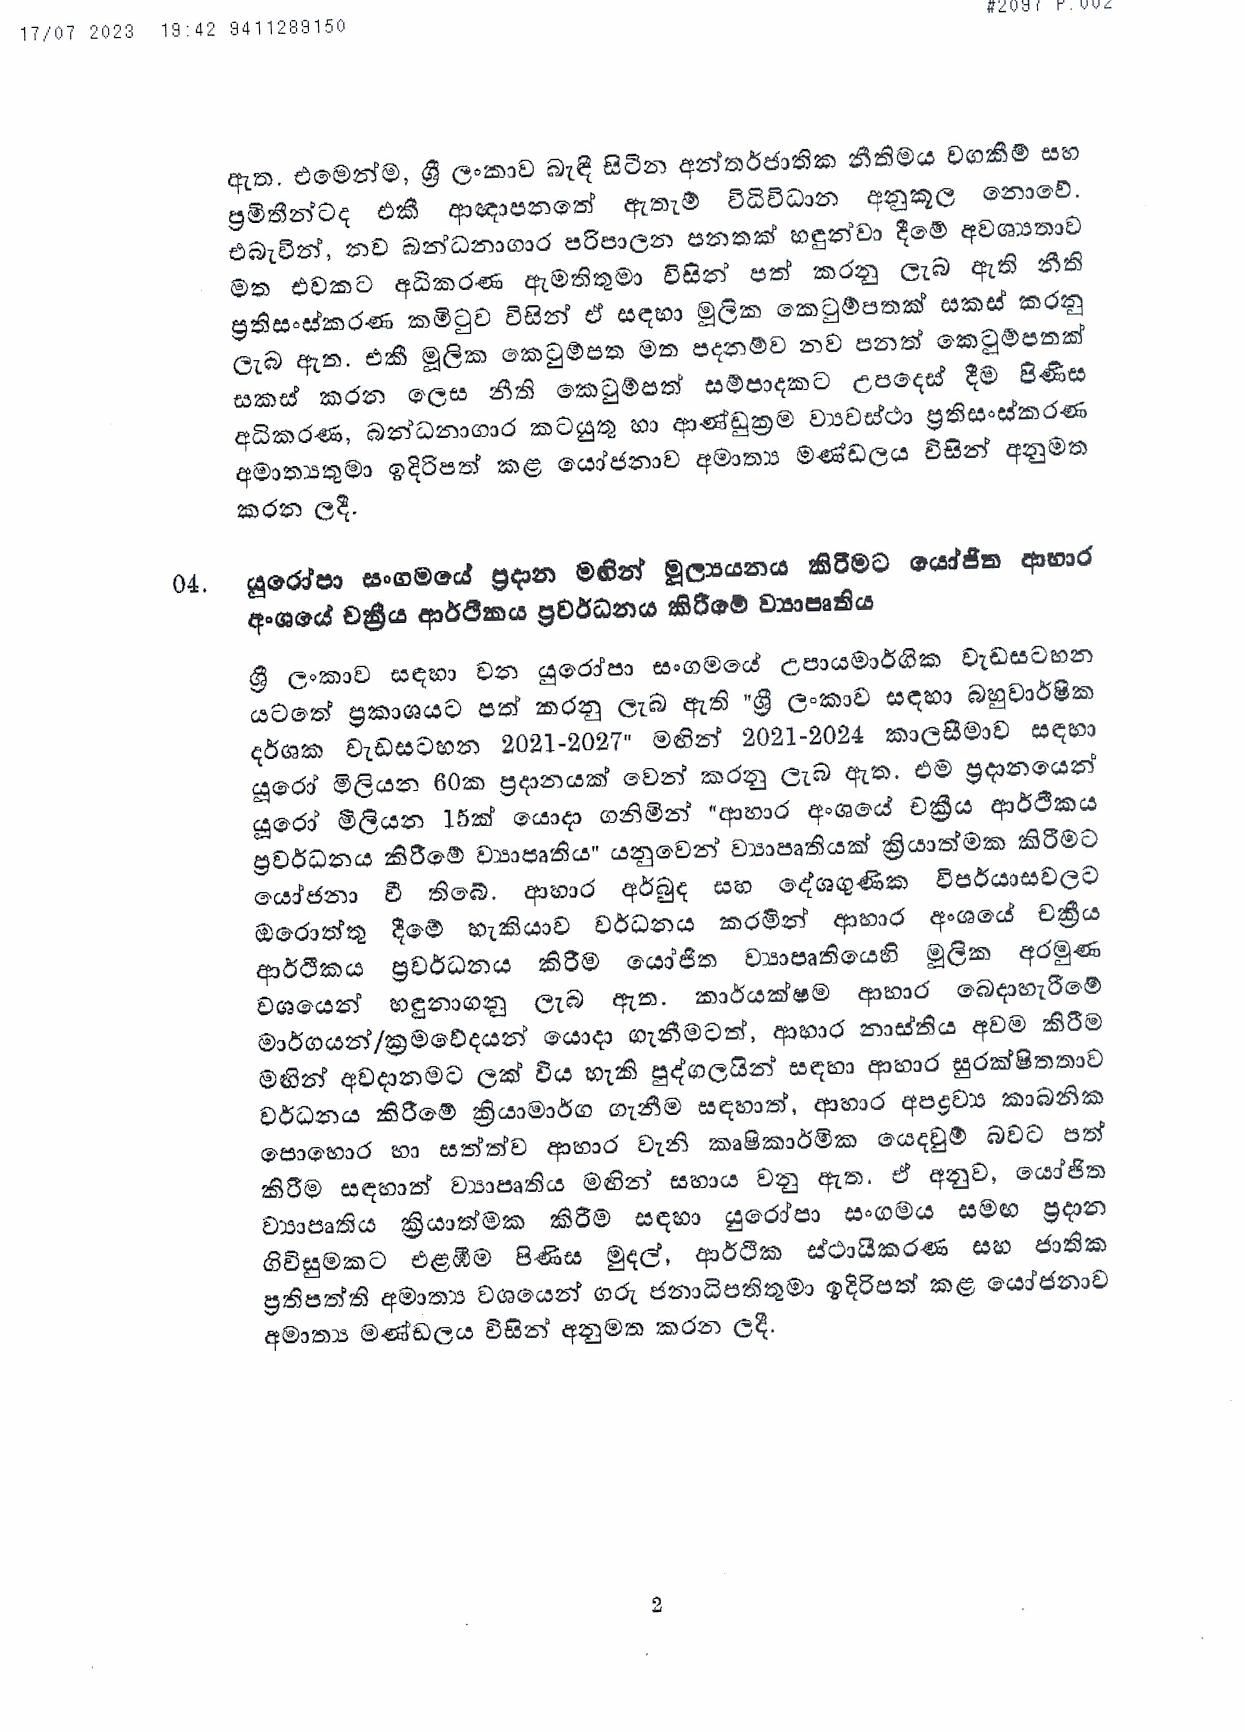 Cabinet Decision on 17.07.2023 page 002